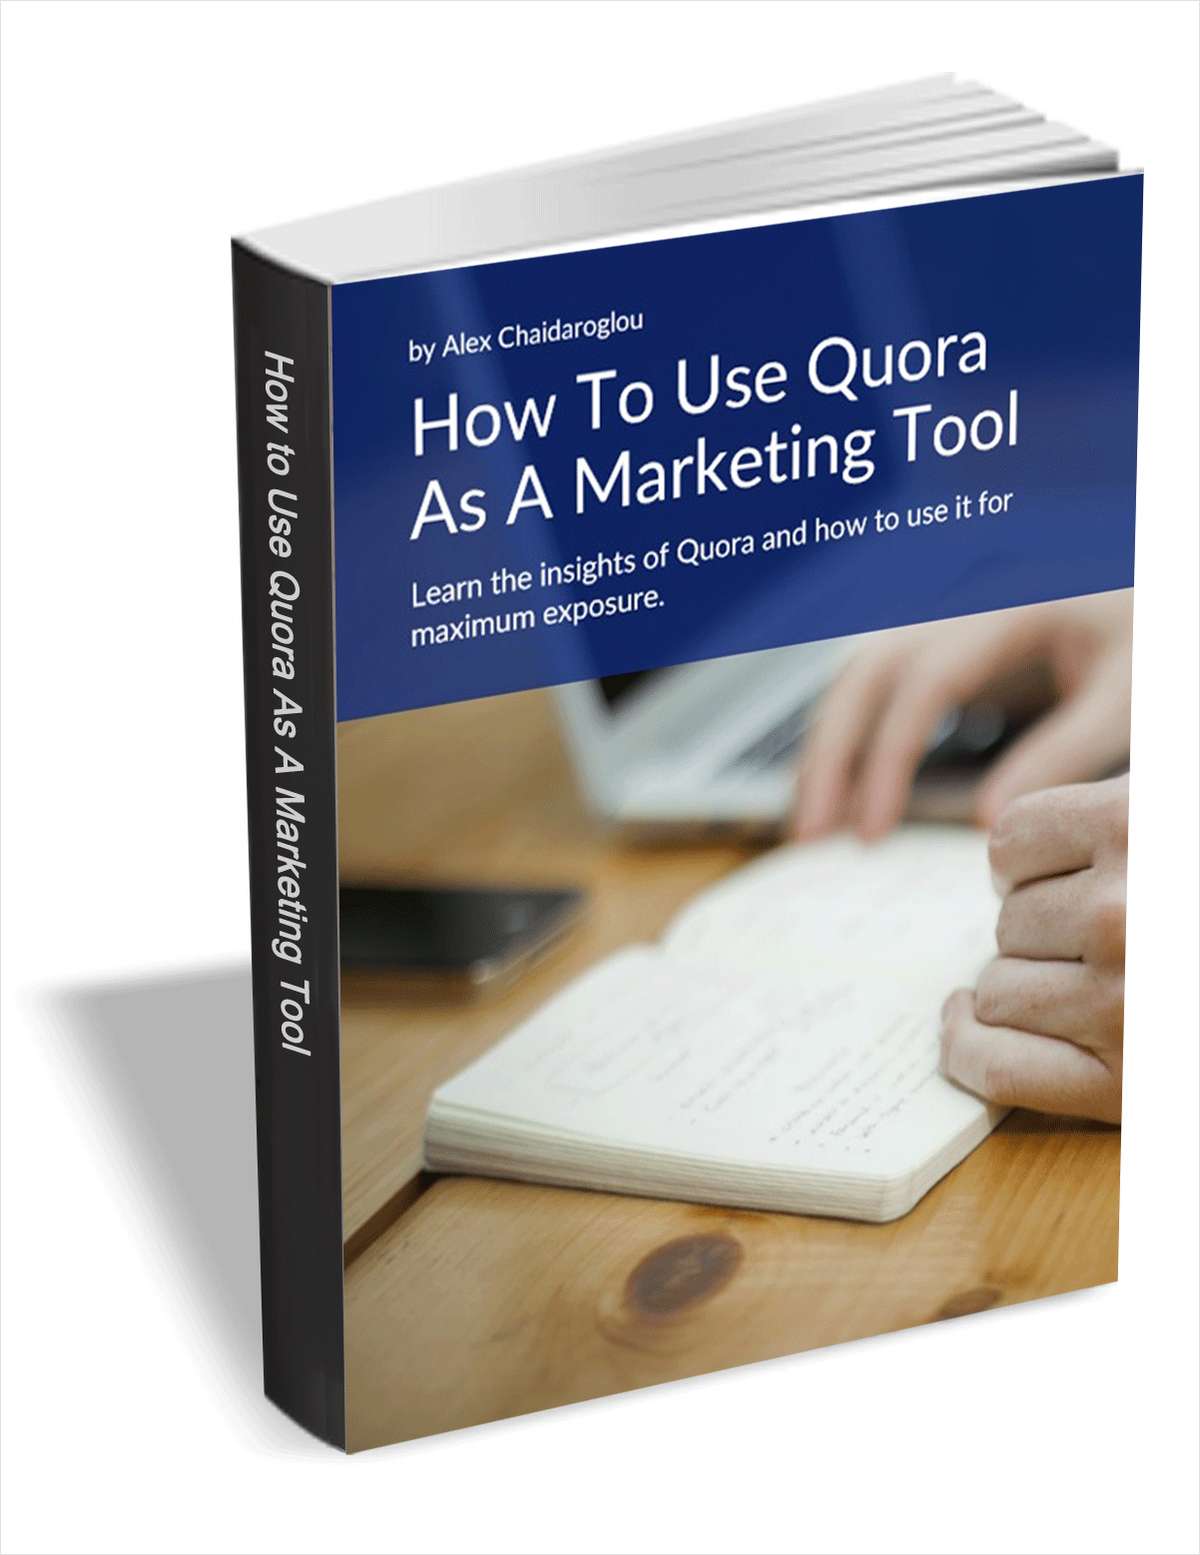 How To Use Quora As A Marketing Tool